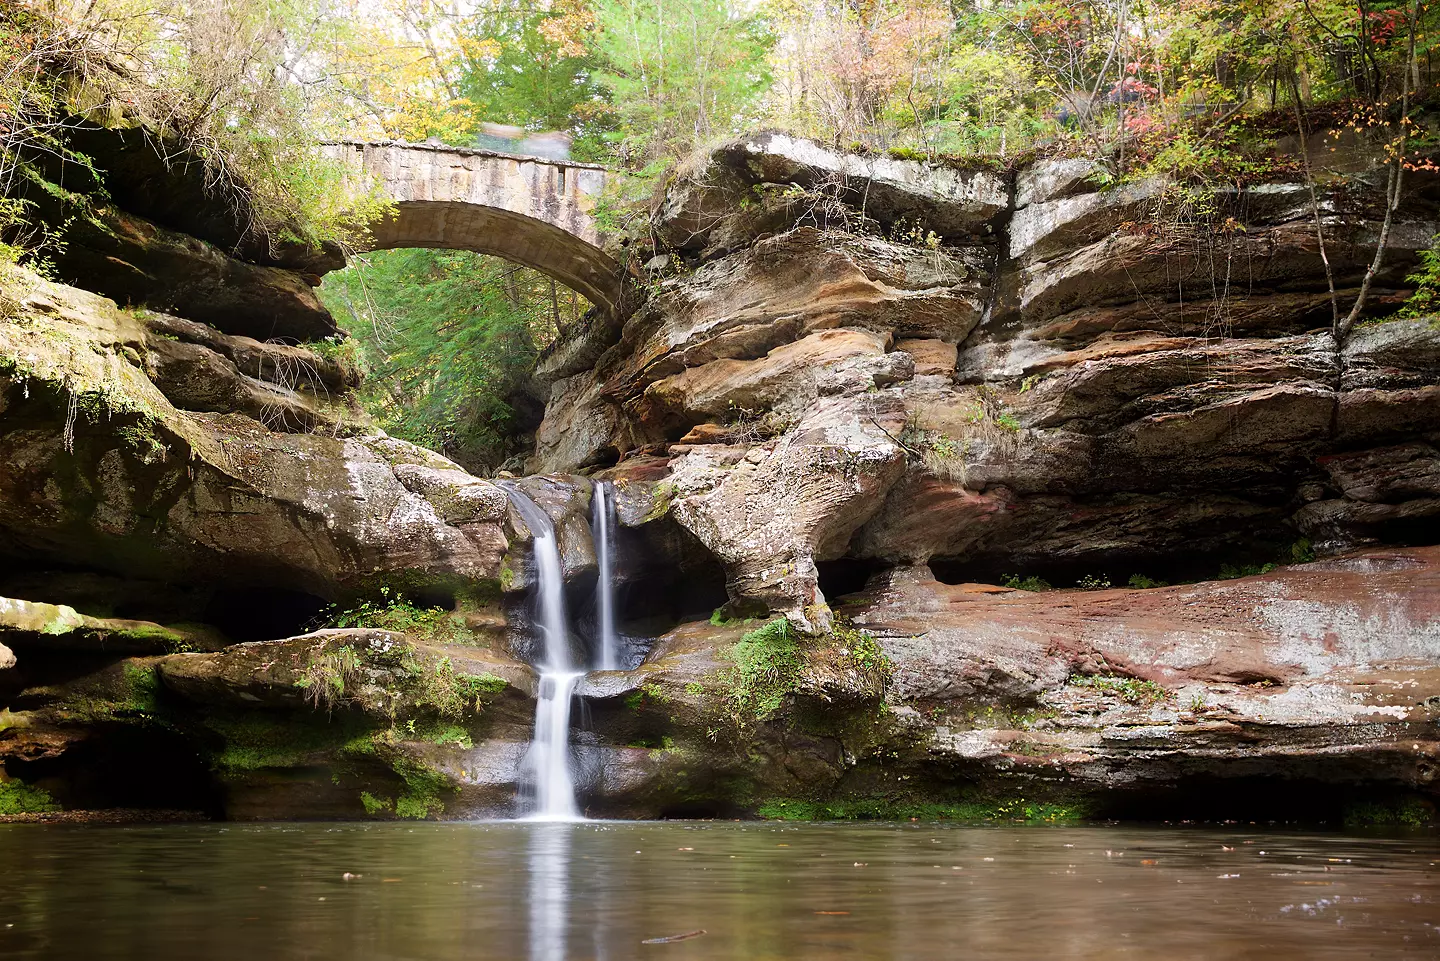 Waterfall in Hocking Hills State Park in Ohio.